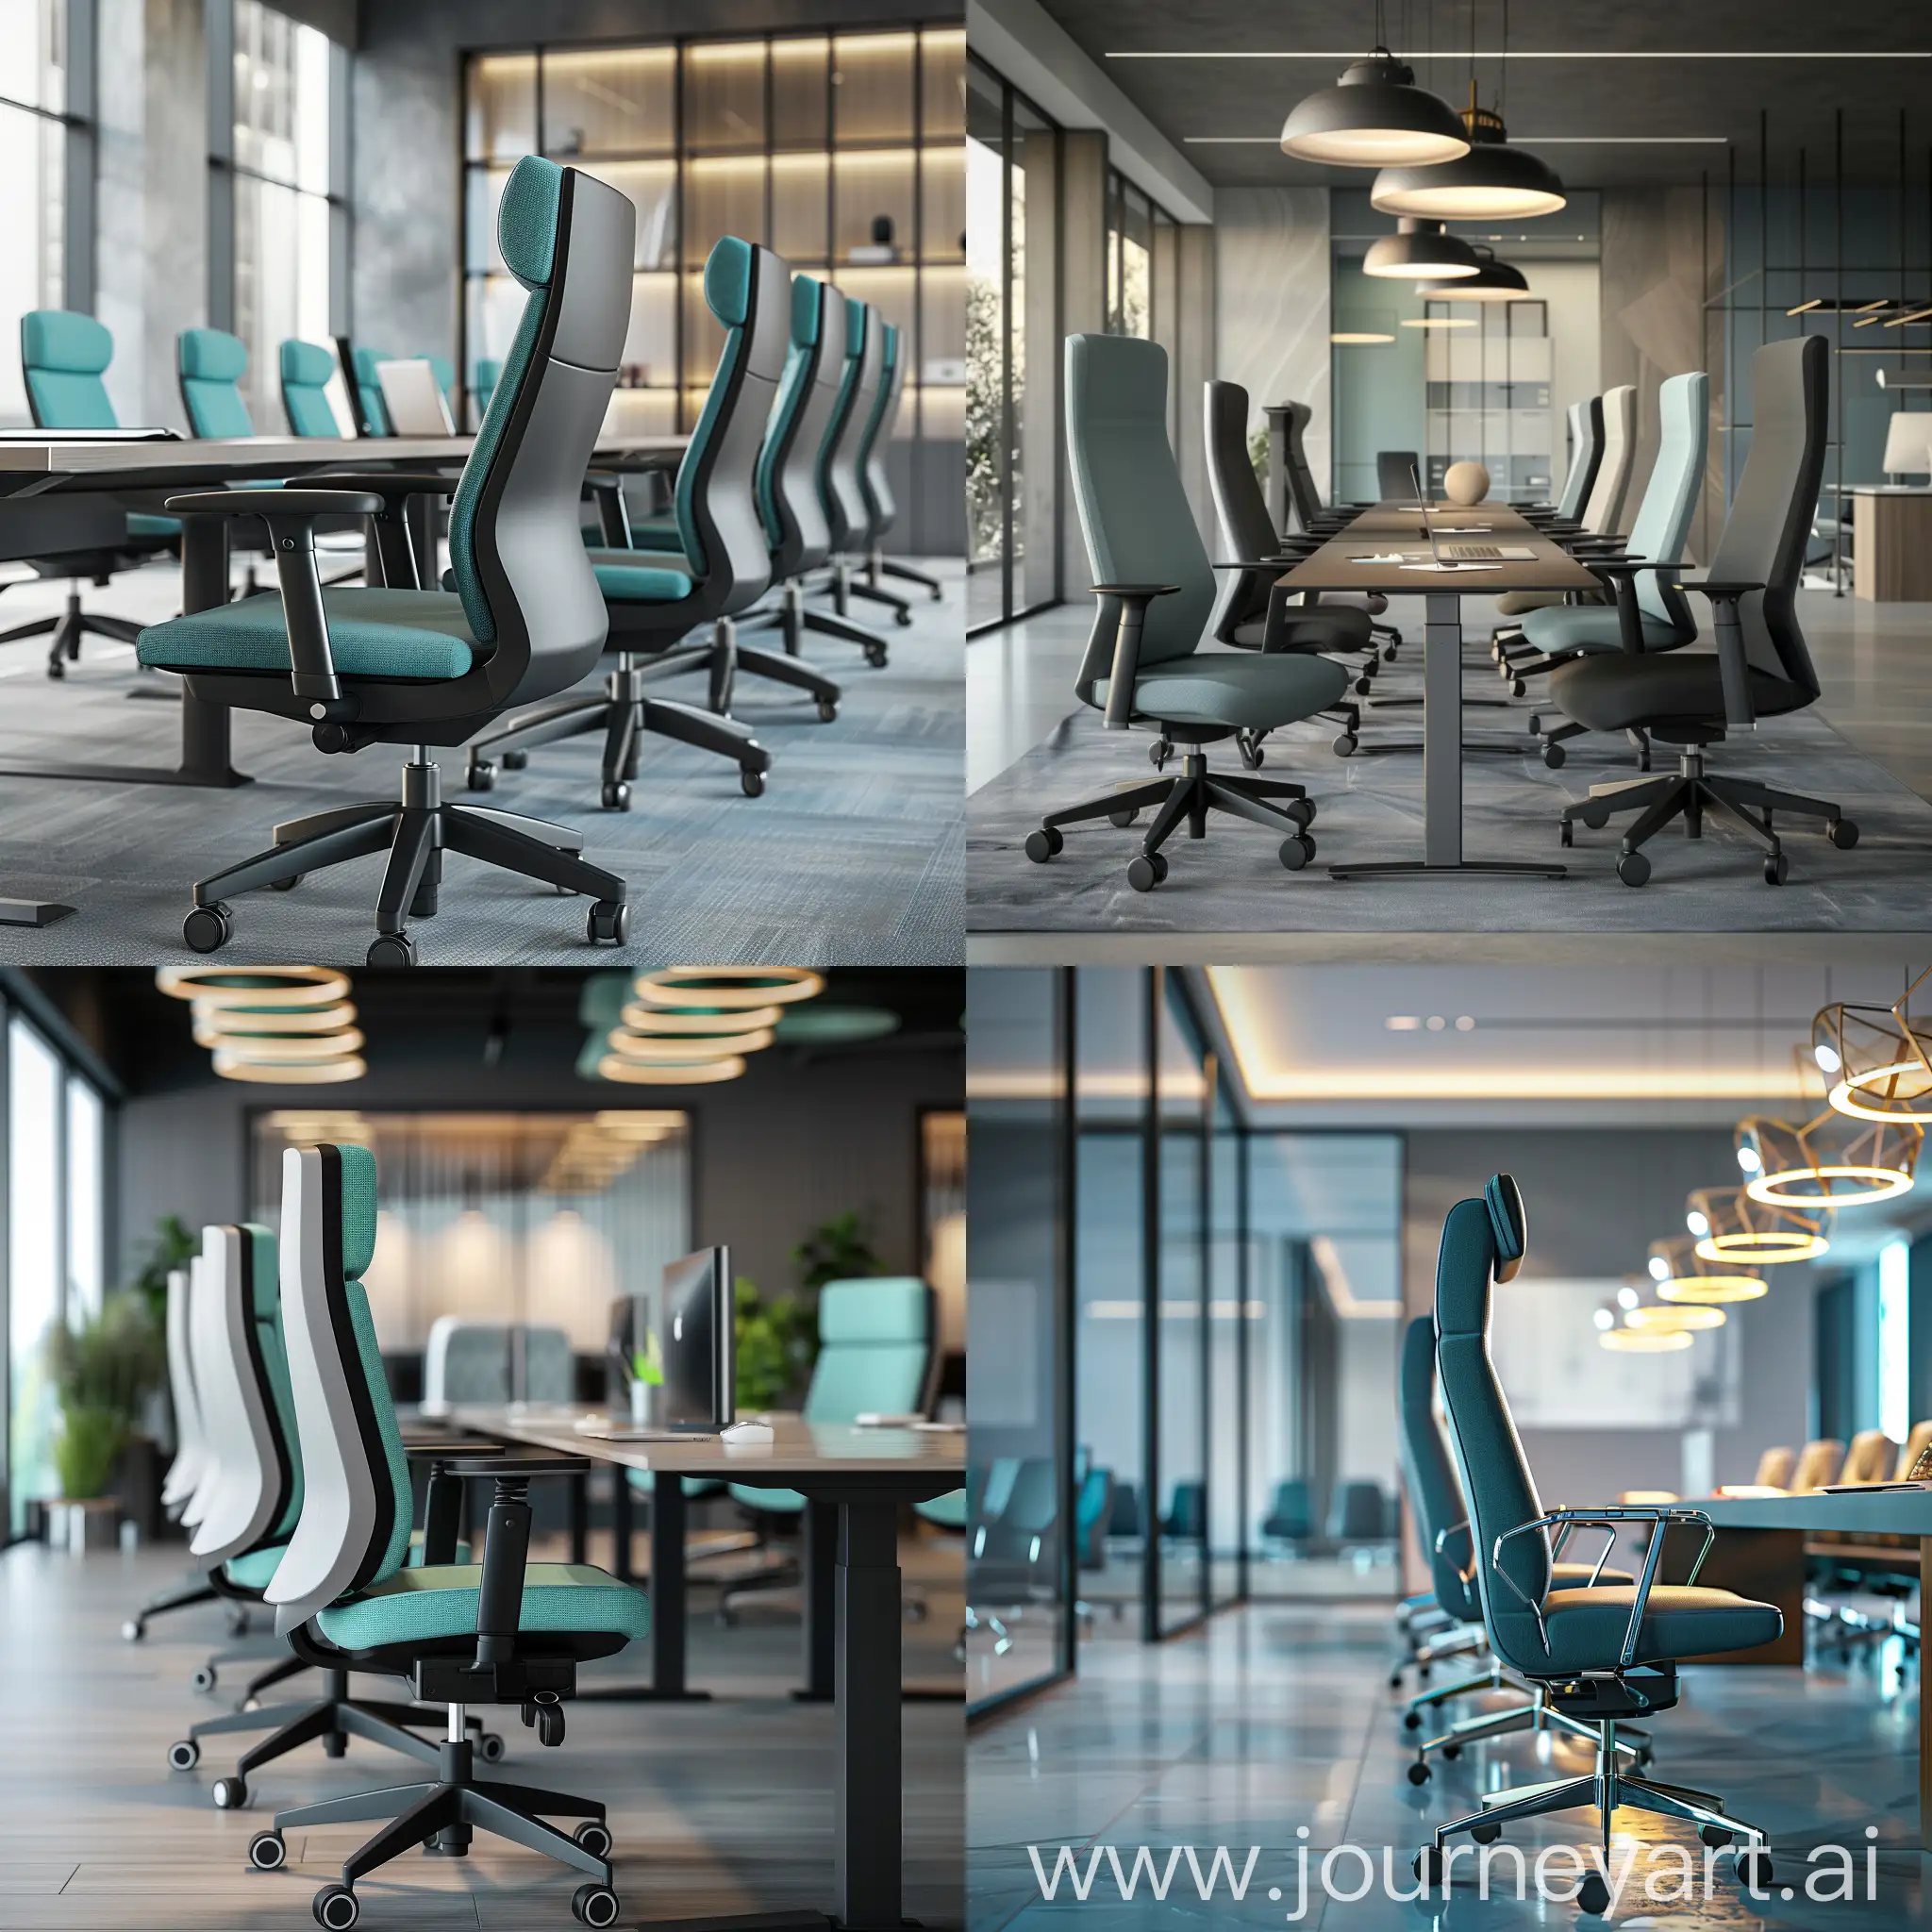 Contemporary-Ergonomic-Office-Chairs-in-Bright-Modern-Office-Setting